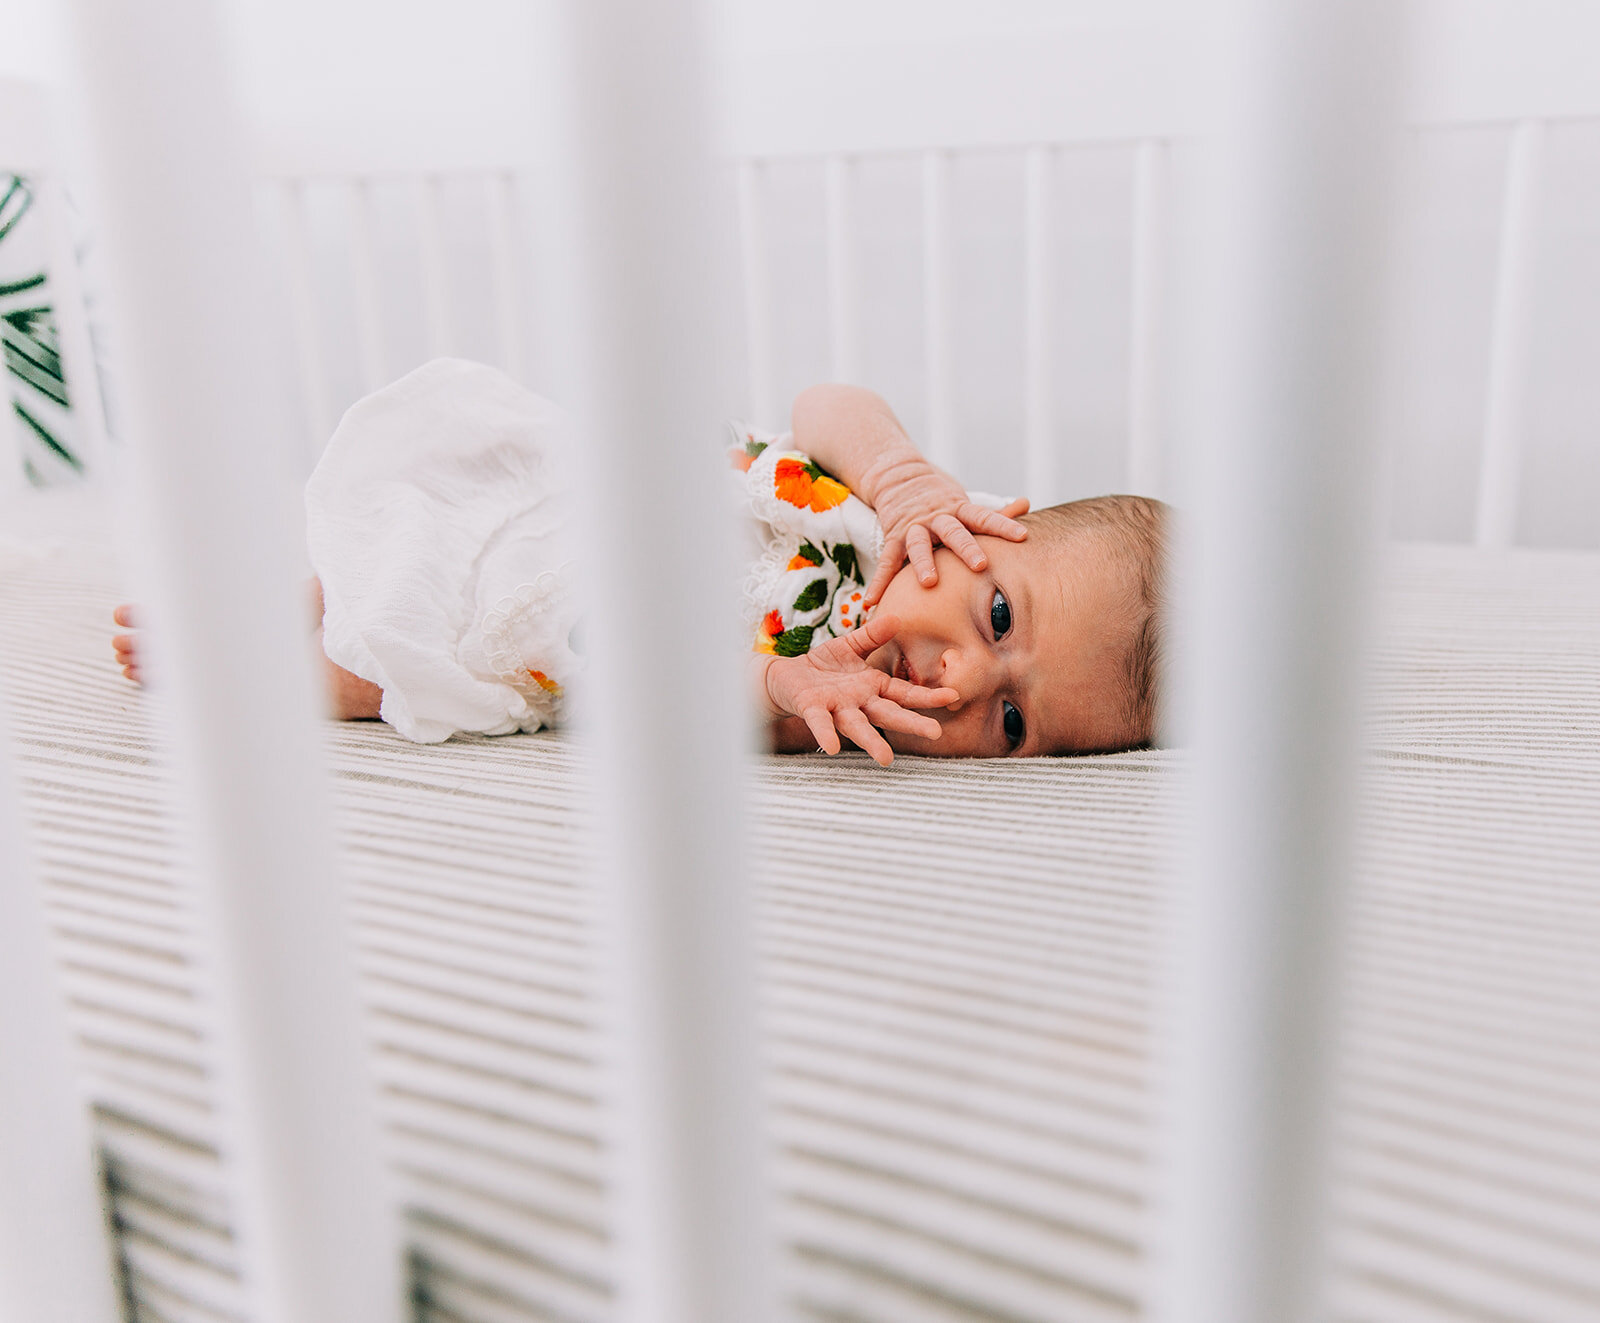  crib pose inspiration baby girl newborn photography professional photographers in cache valley logan utah professional family photographers newborn pose inspiration casual photoshoot baby giggles bella alder photography adorable baby pictures fresh 